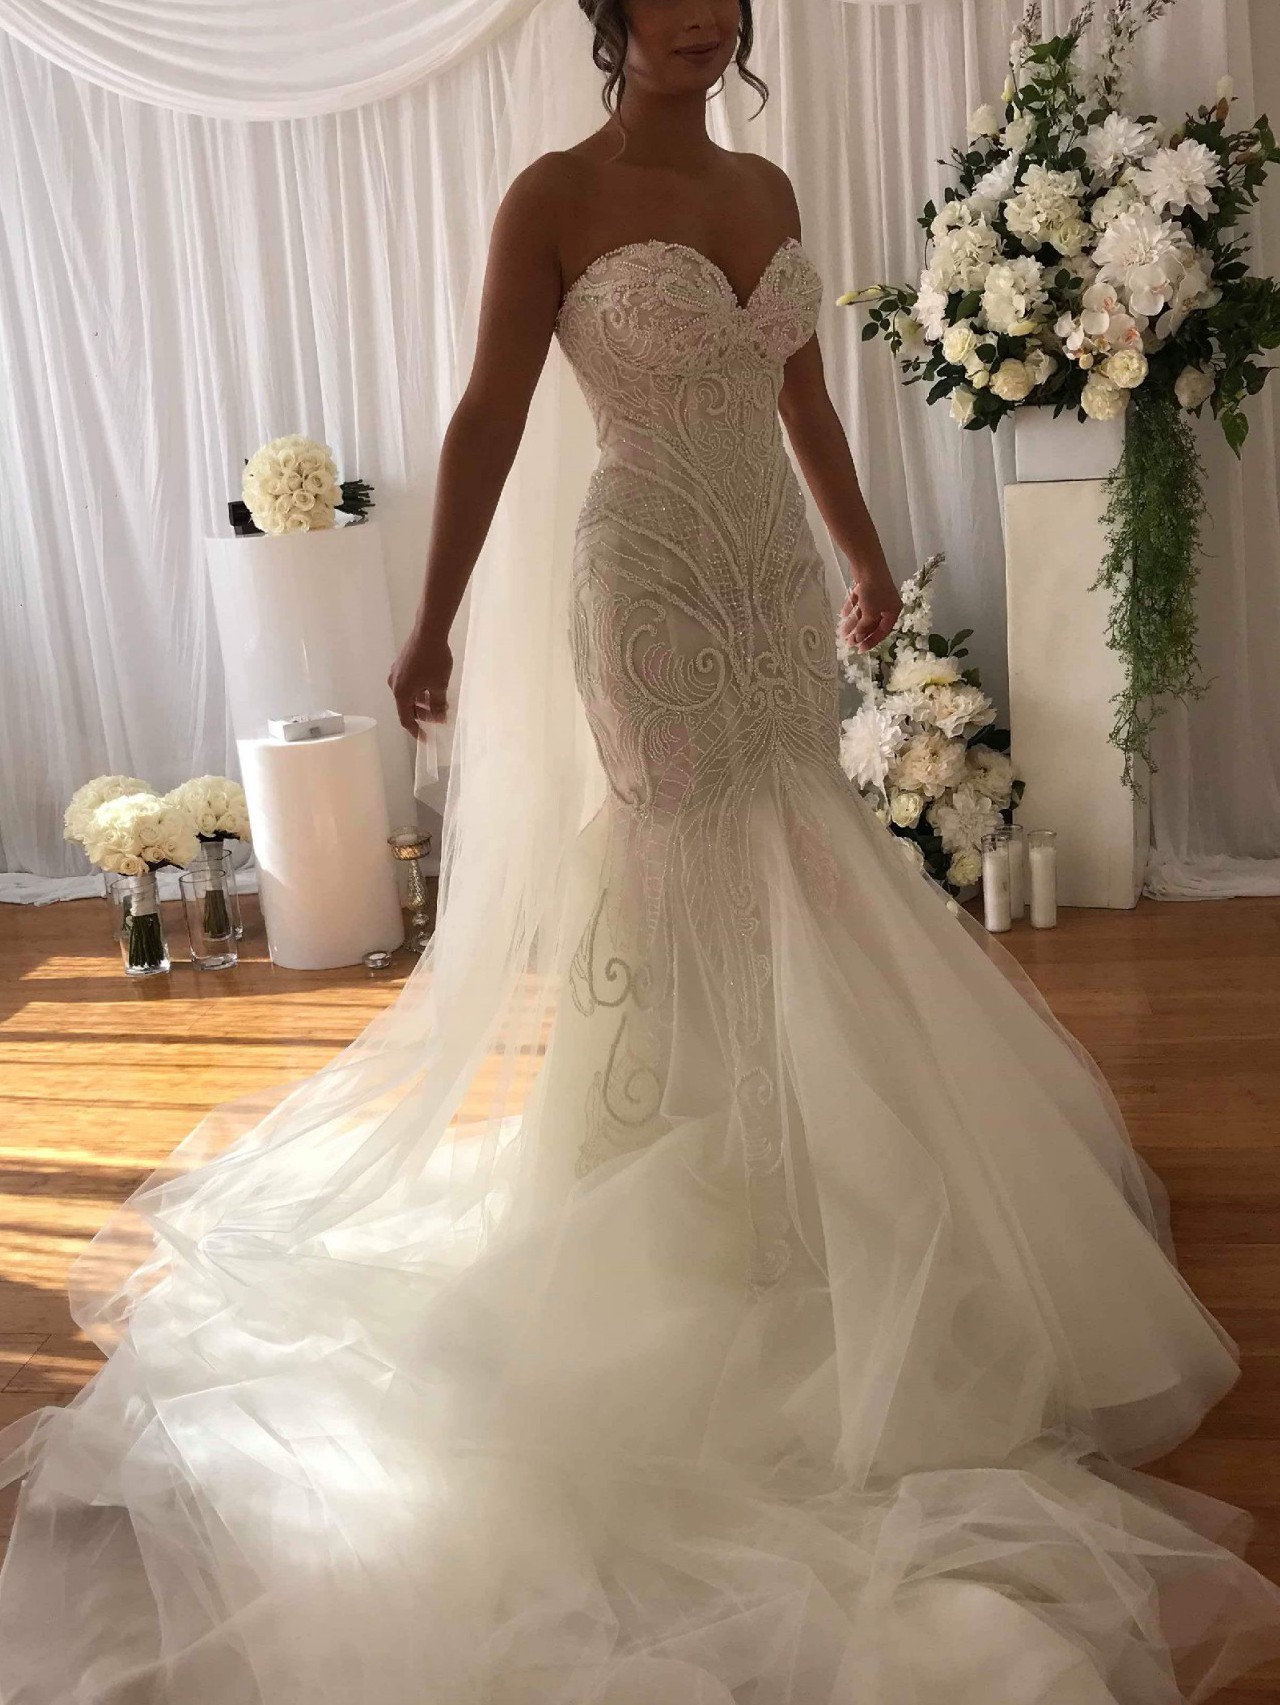 Norma And Lili Bridal Couture Custom Made Preowned Wedding Dress Save ...